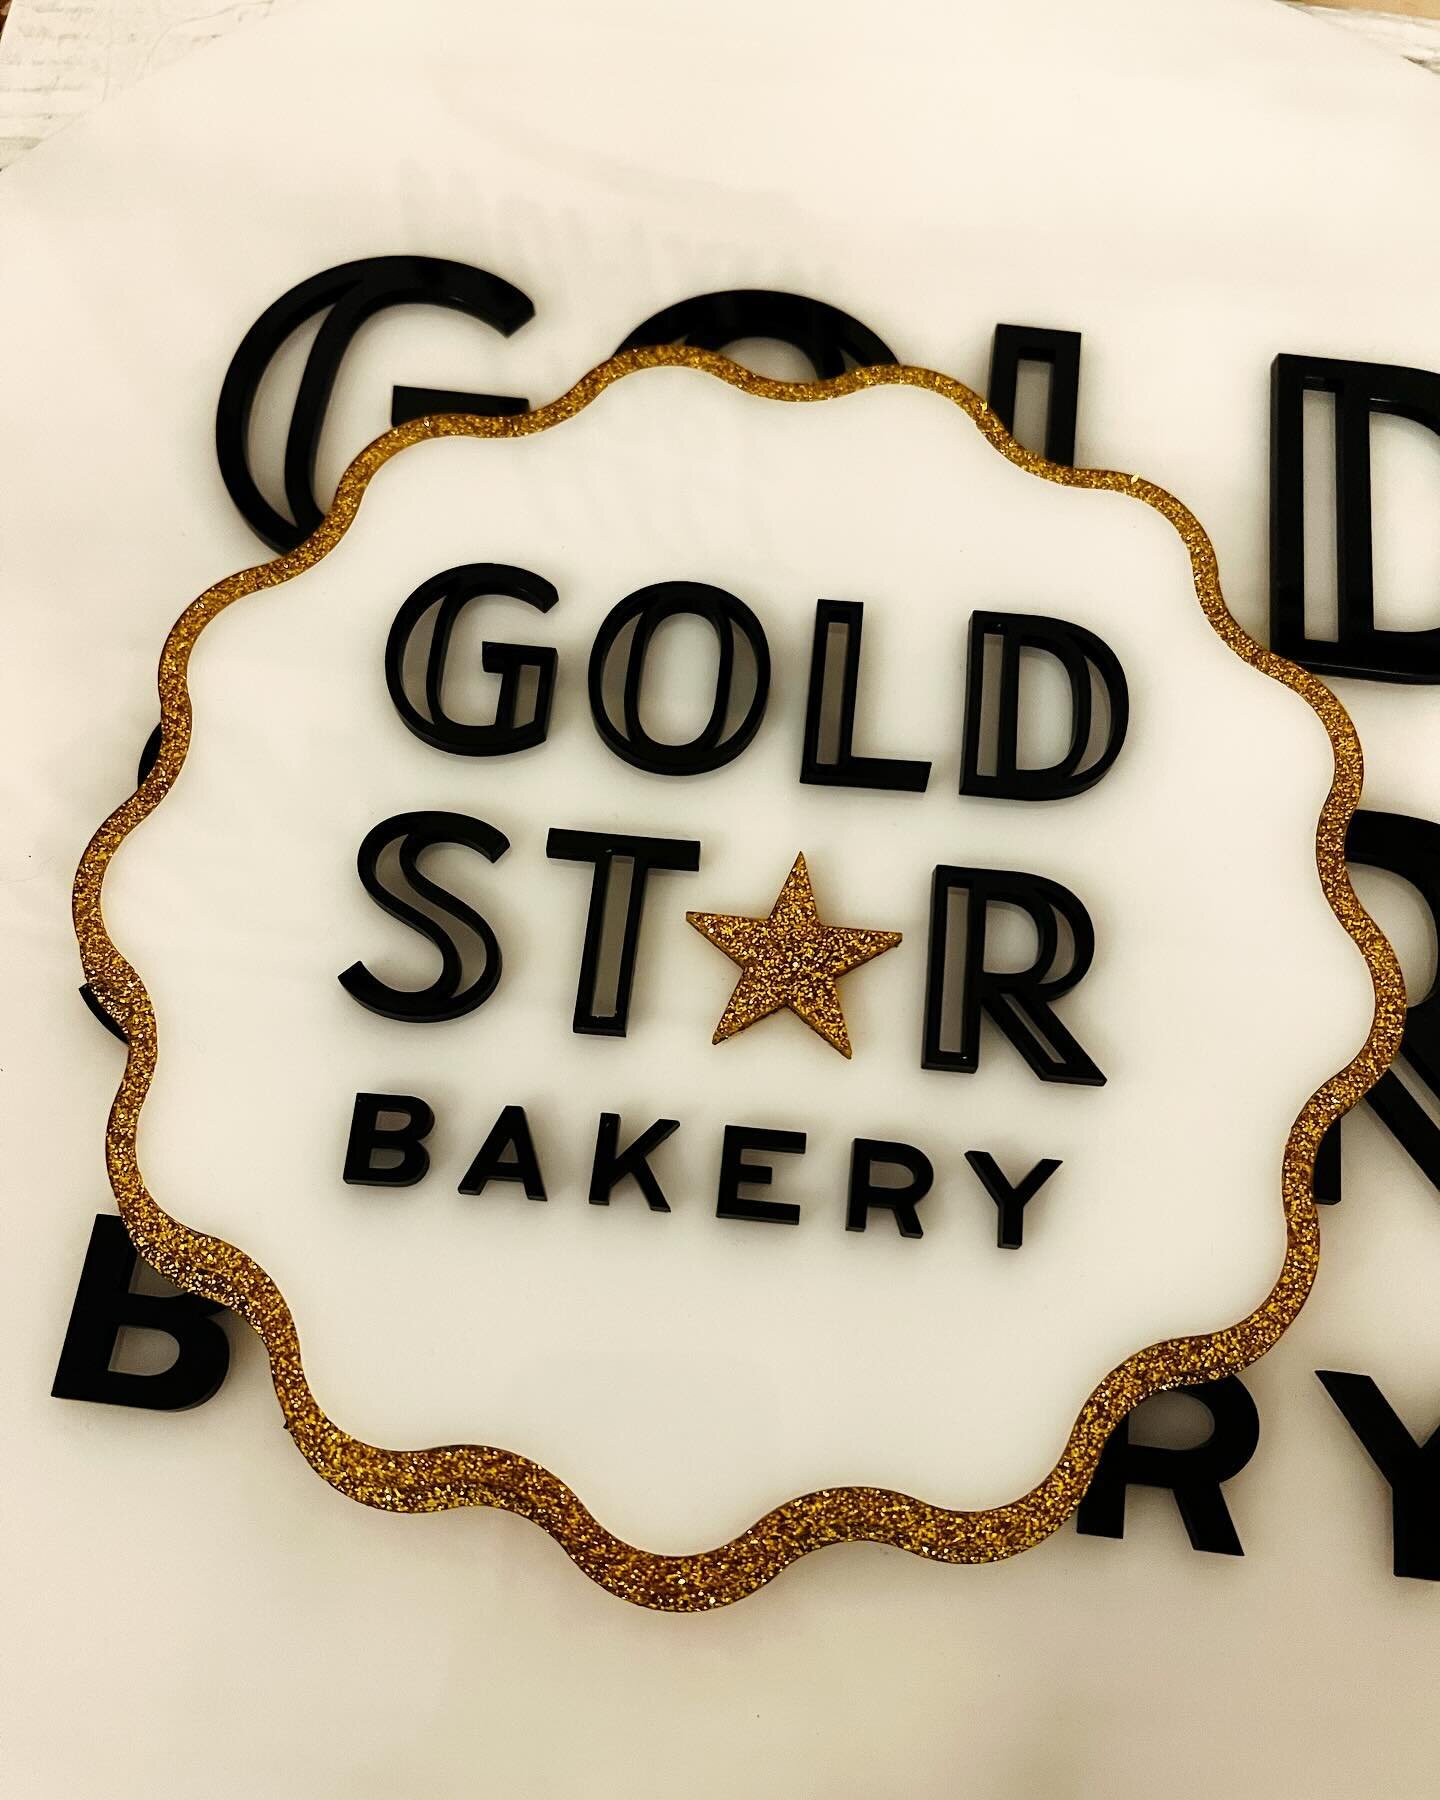 Got a real ✨gold rush ✨ making these storefront signs for @goldstarbakeryativywild.  You know we really love our client when we let glitter in our studio! 

#branding #signs #environmentdesign #